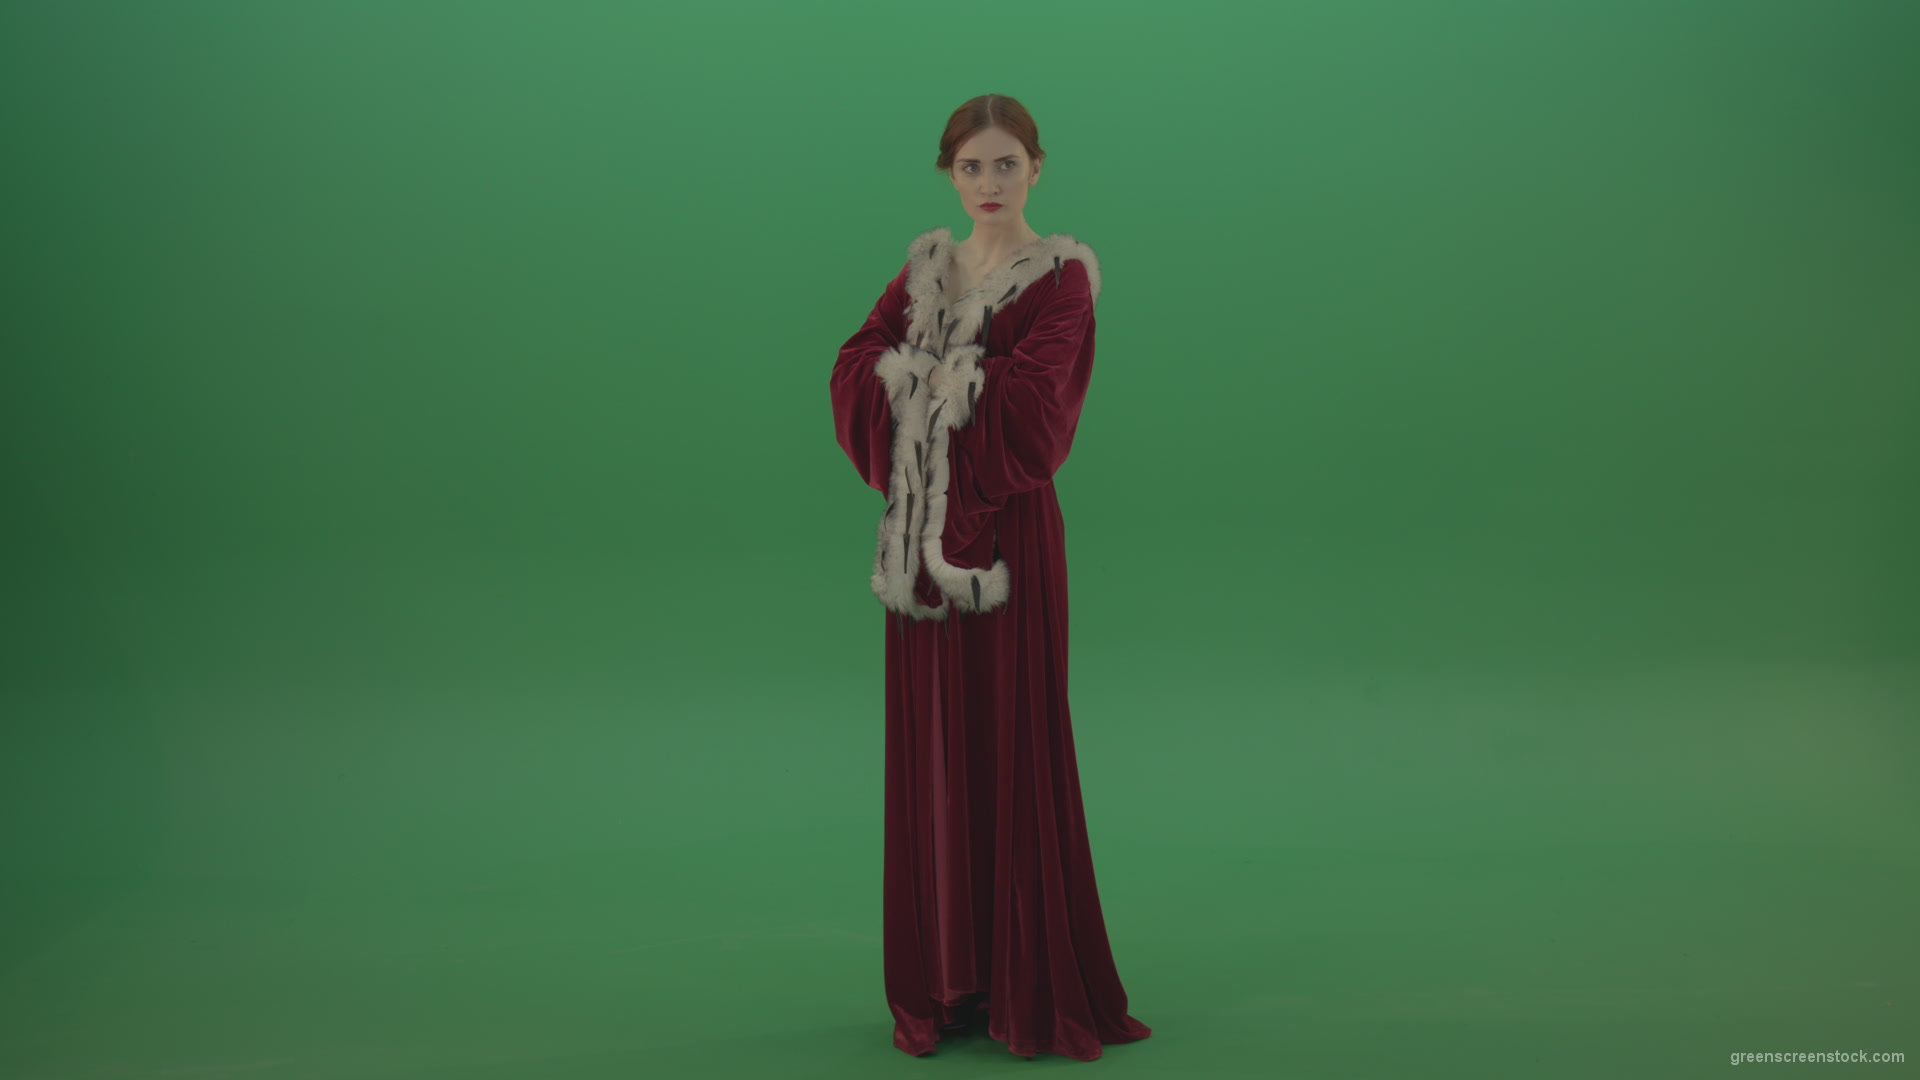 Young-actress-dressed-in-royal-dress-showing-different-scenes_008 Green Screen Stock